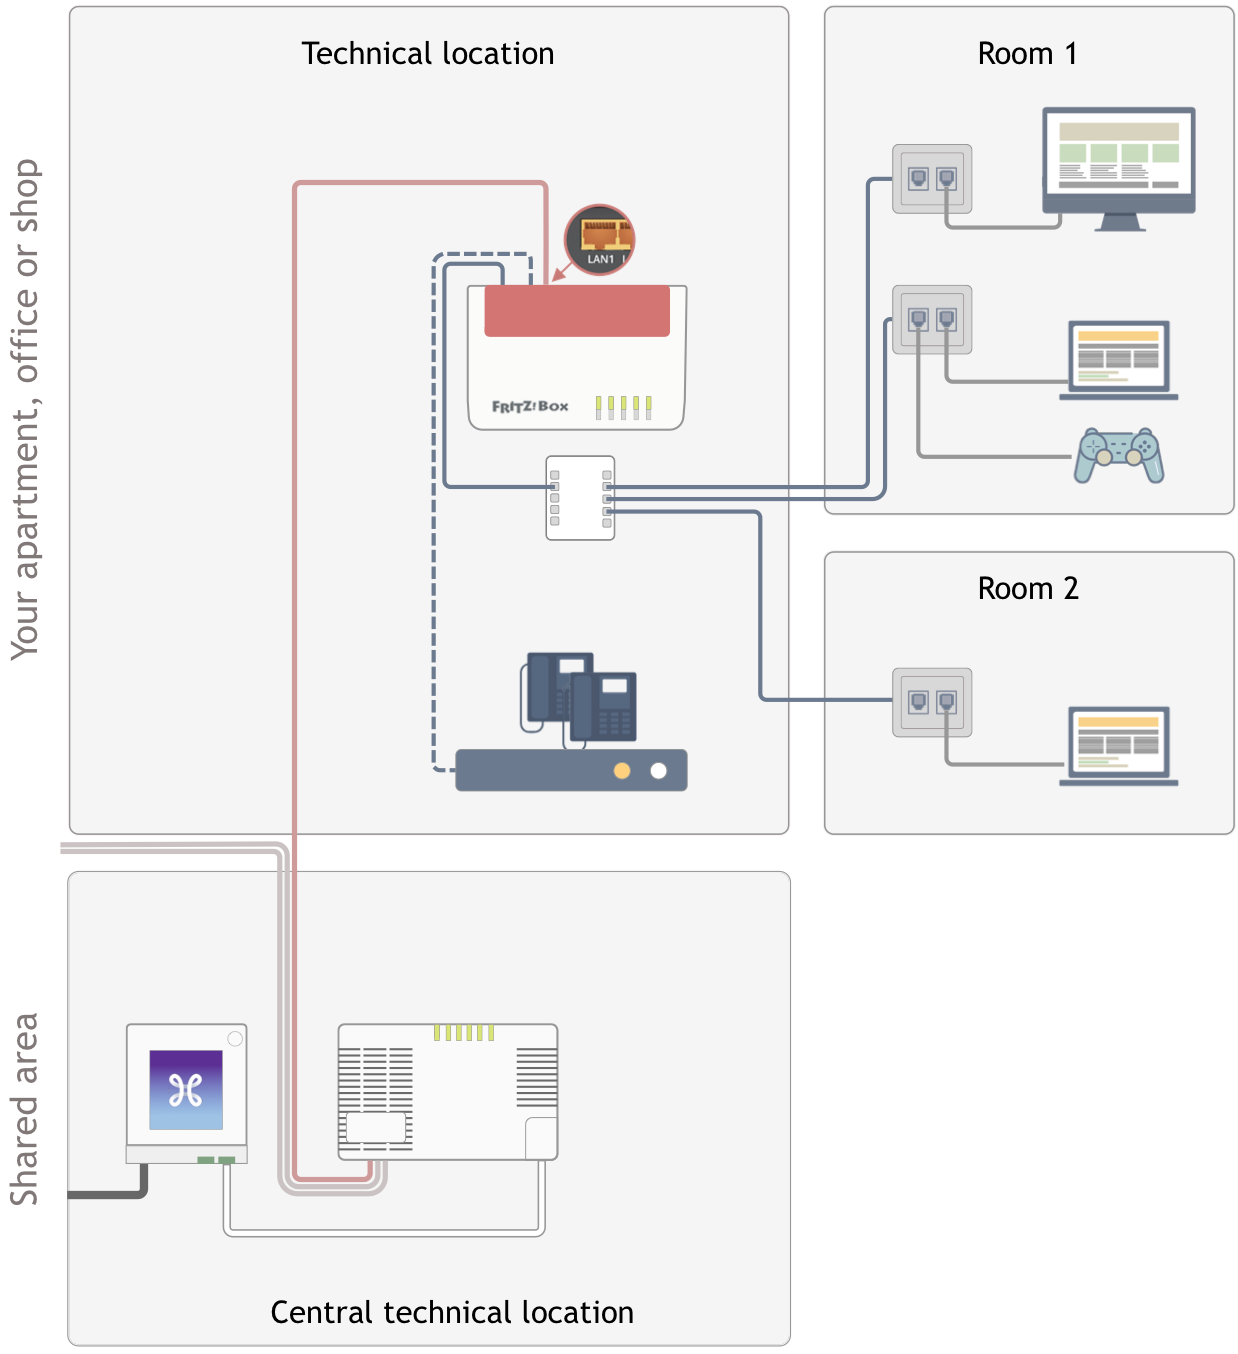 I have a fiber connection, what should I know about the internal cabling